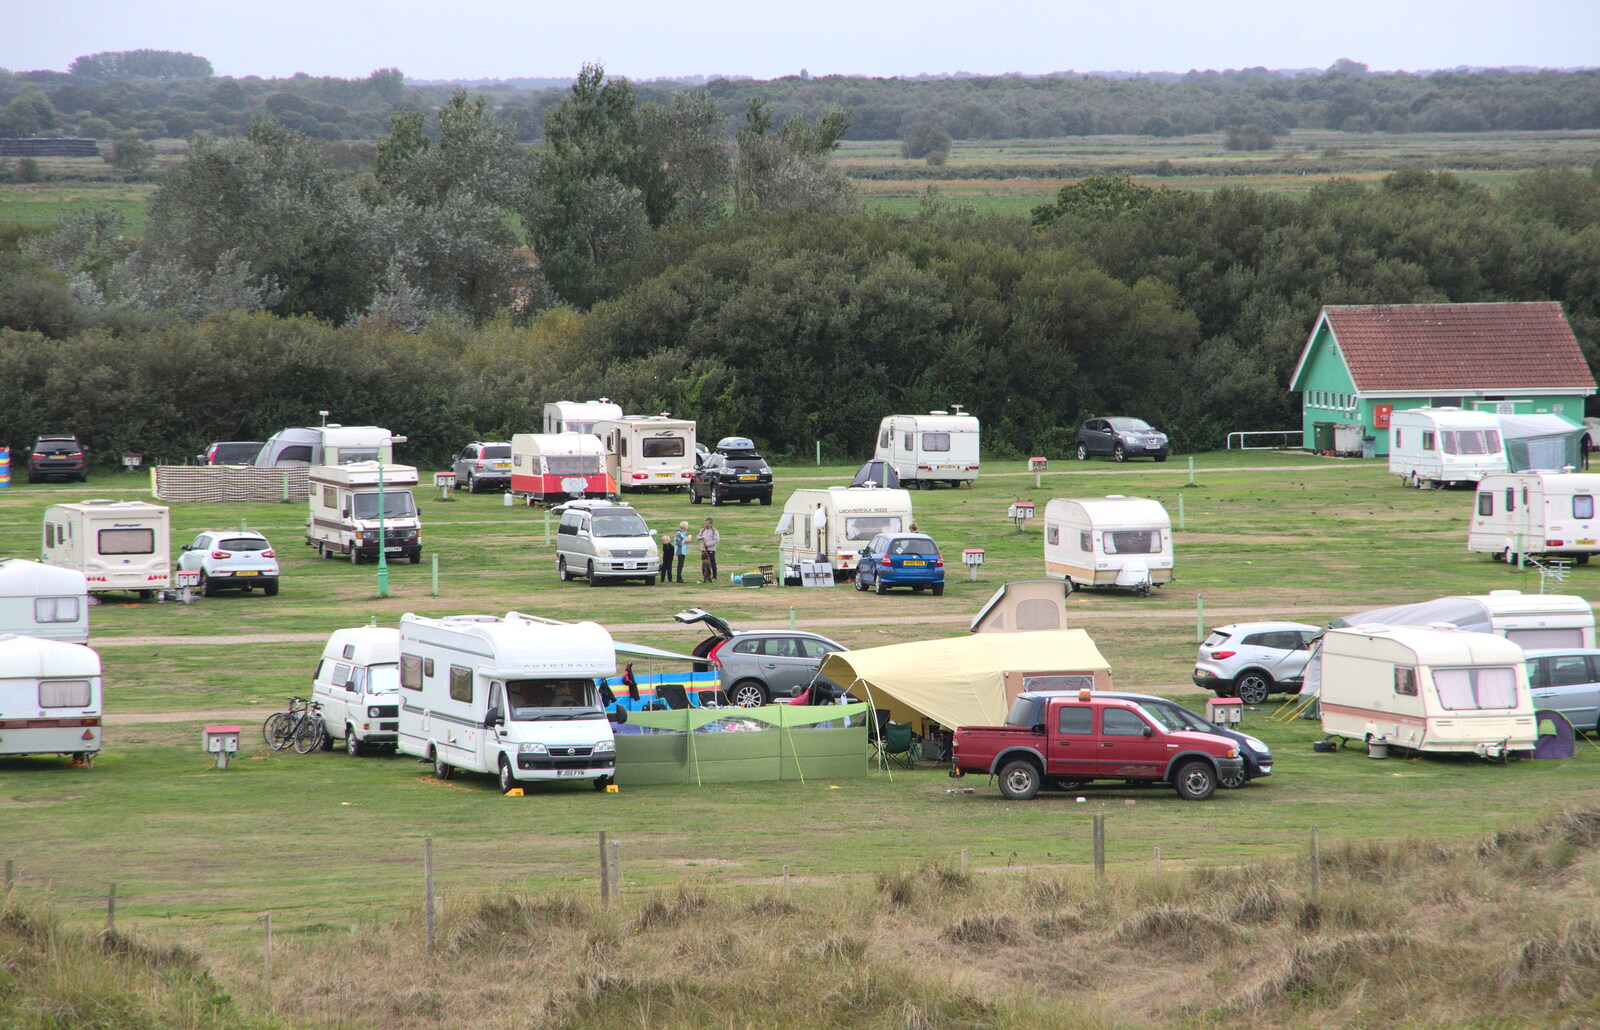 There are still a few people around camping from An Optimistic Camping Weekend, Waxham Sands, Norfolk - 22nd September 2018